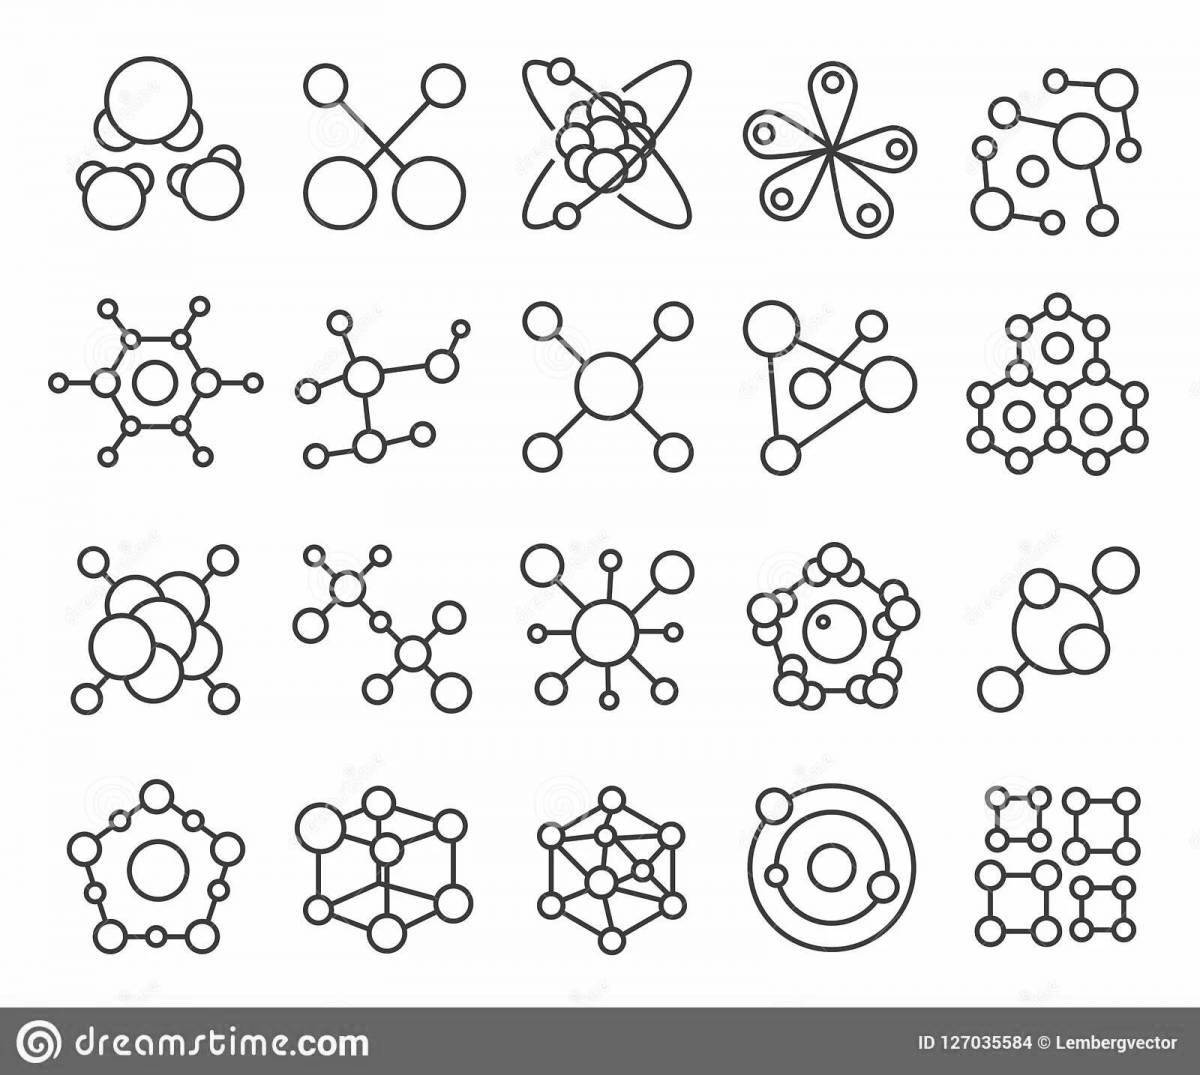 Playful water molecule coloring page